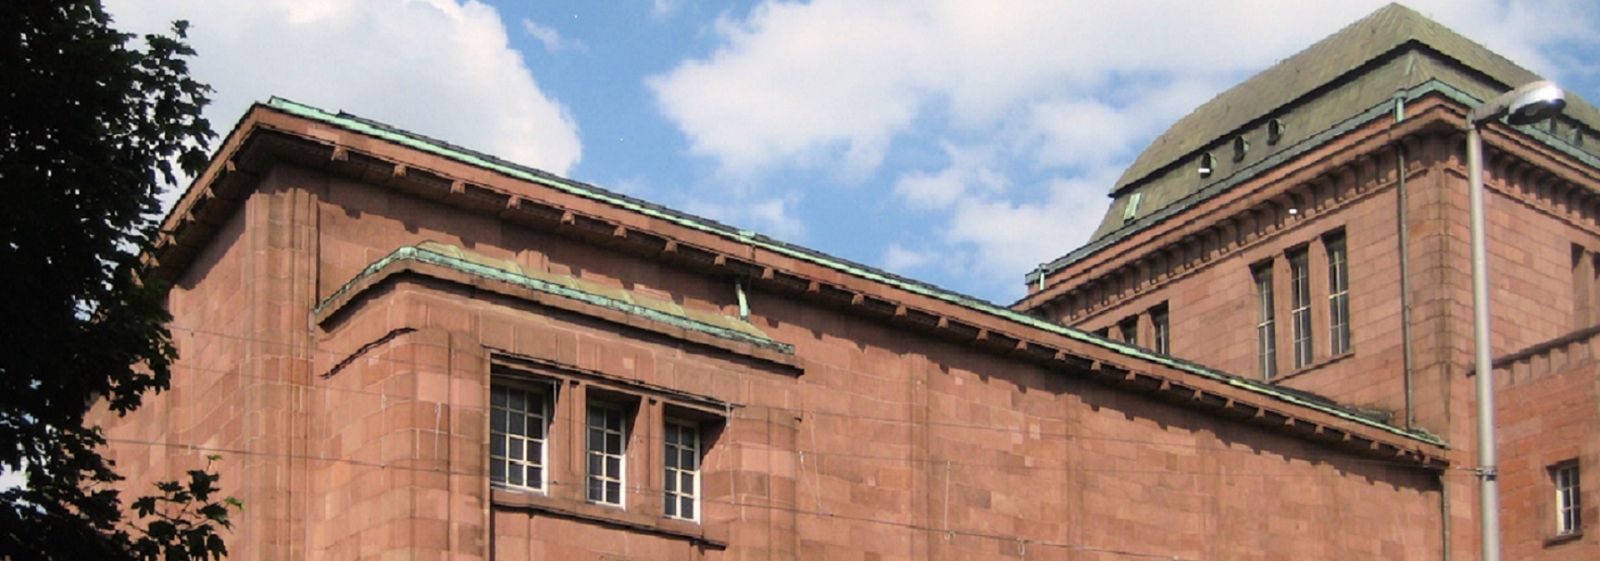 The Billing Building, a Kunsthalle Mannheim building dating from 1907, was completely renovated. The various measures are intended to reduce energy costs by 25%.